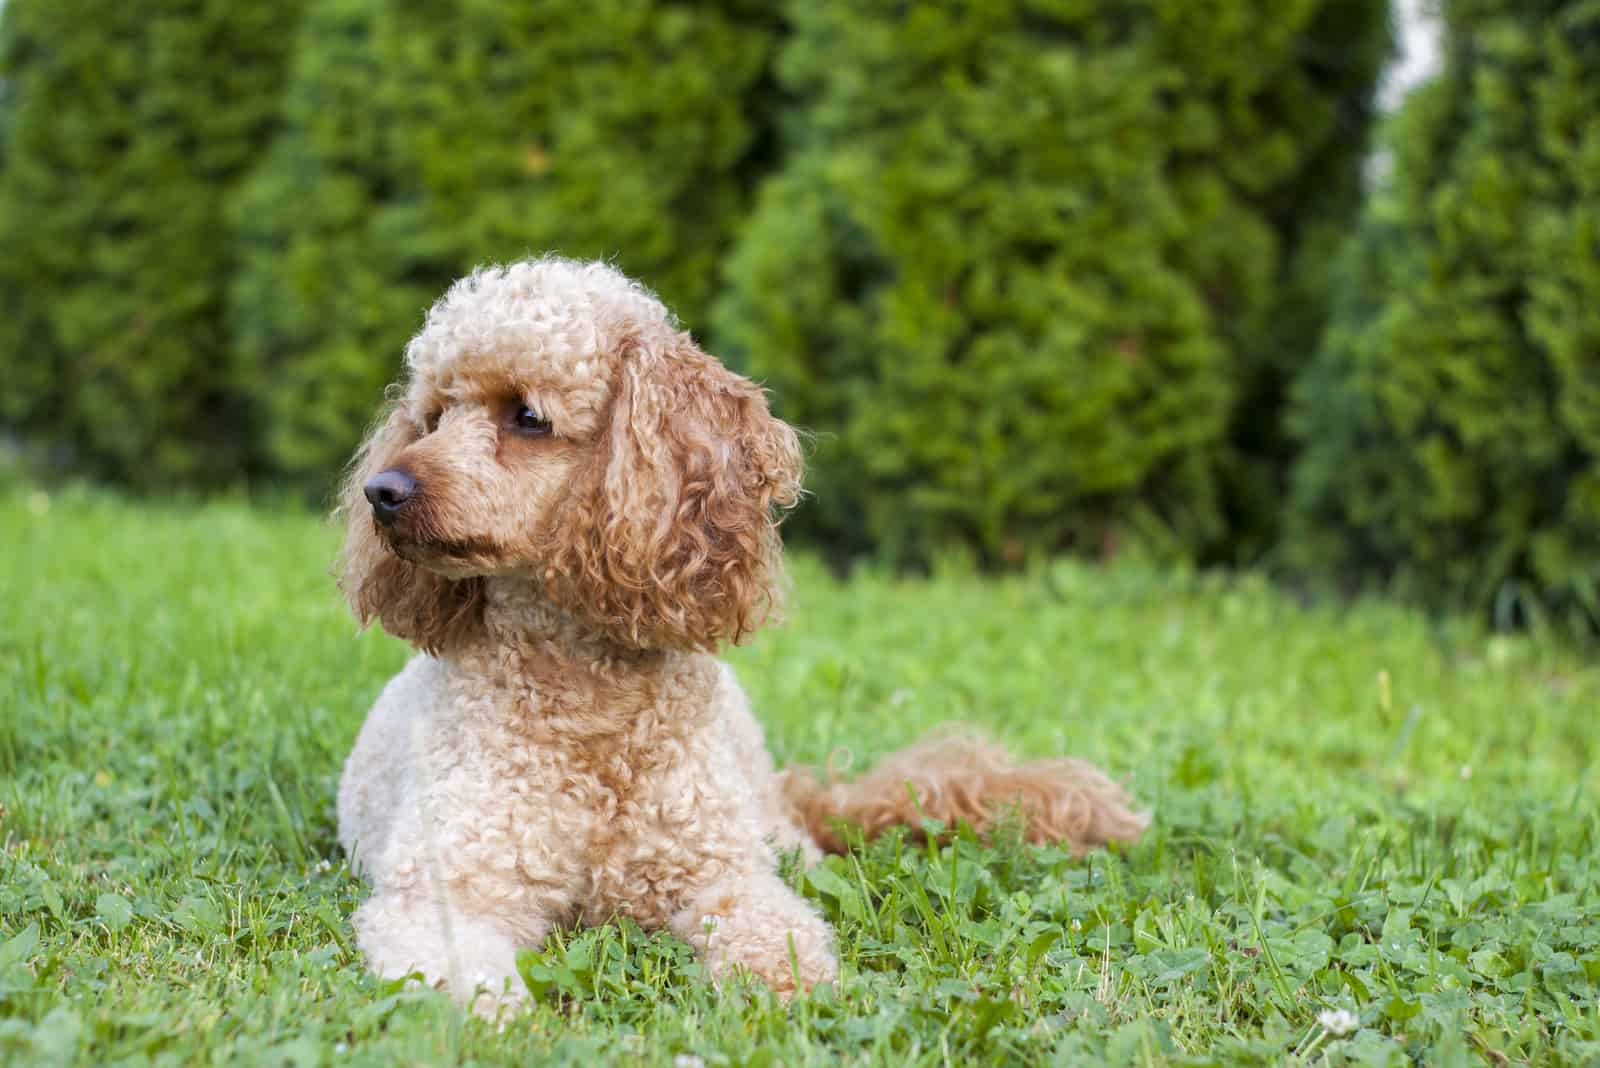 Moyen Poodles: 14 Questions Answered About These Cutie Pies